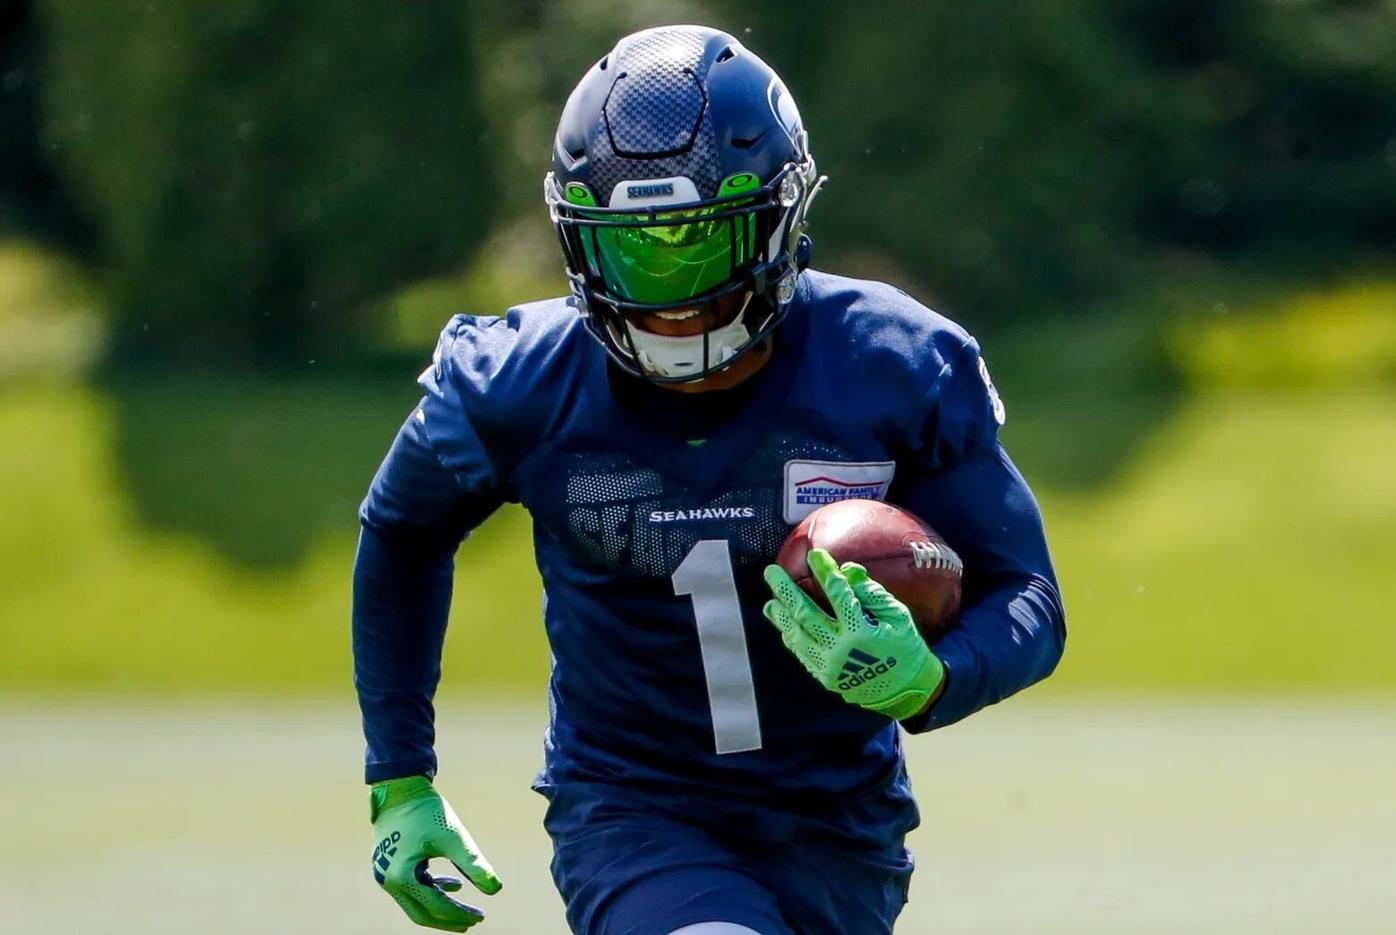 DK Metcalf and Tariq Woolen injuries add to the growing Seahawks